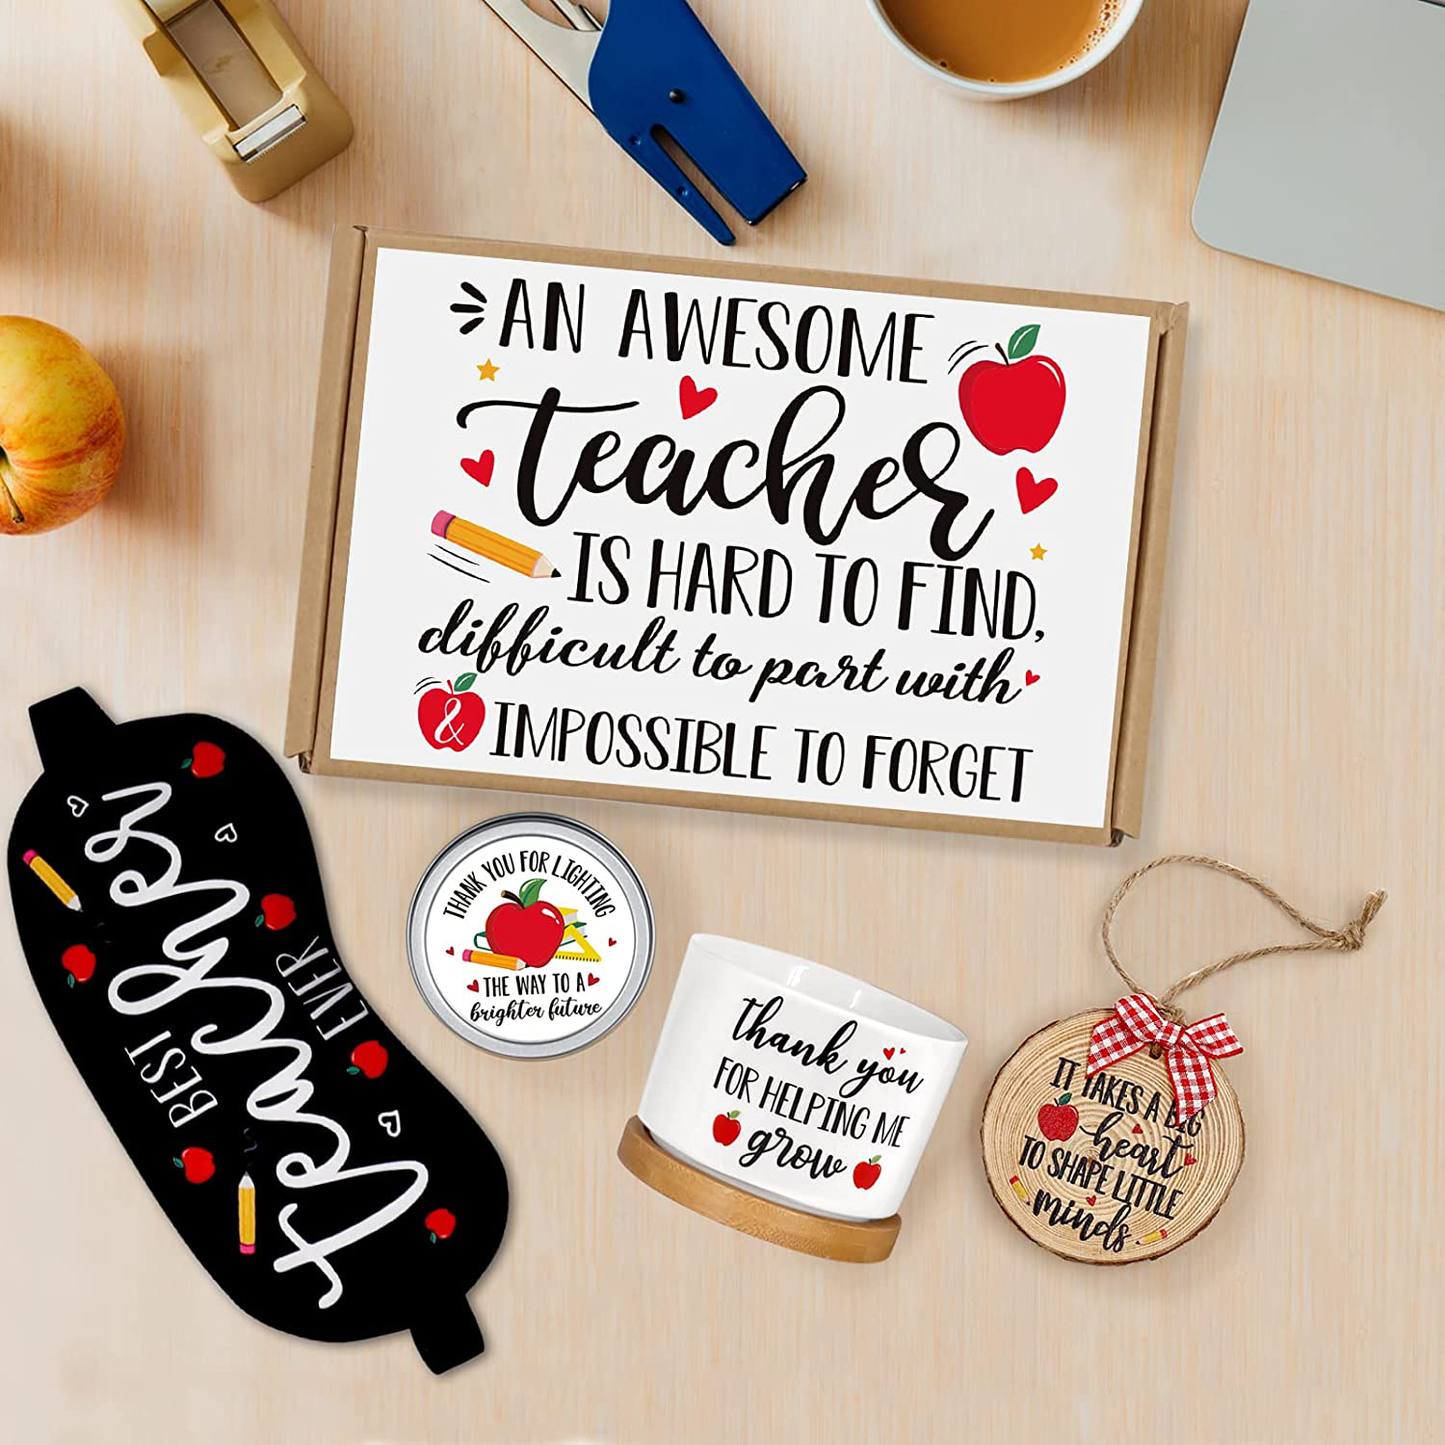 Teacher Appreciation Gift Basket Birthday Christmas Gift Box for Master Tutor Mr. Mrs with Holiday Ornament Patch Succulent Plant Pot Greeting Card Apple Candle Present Idea from Student Set of 4